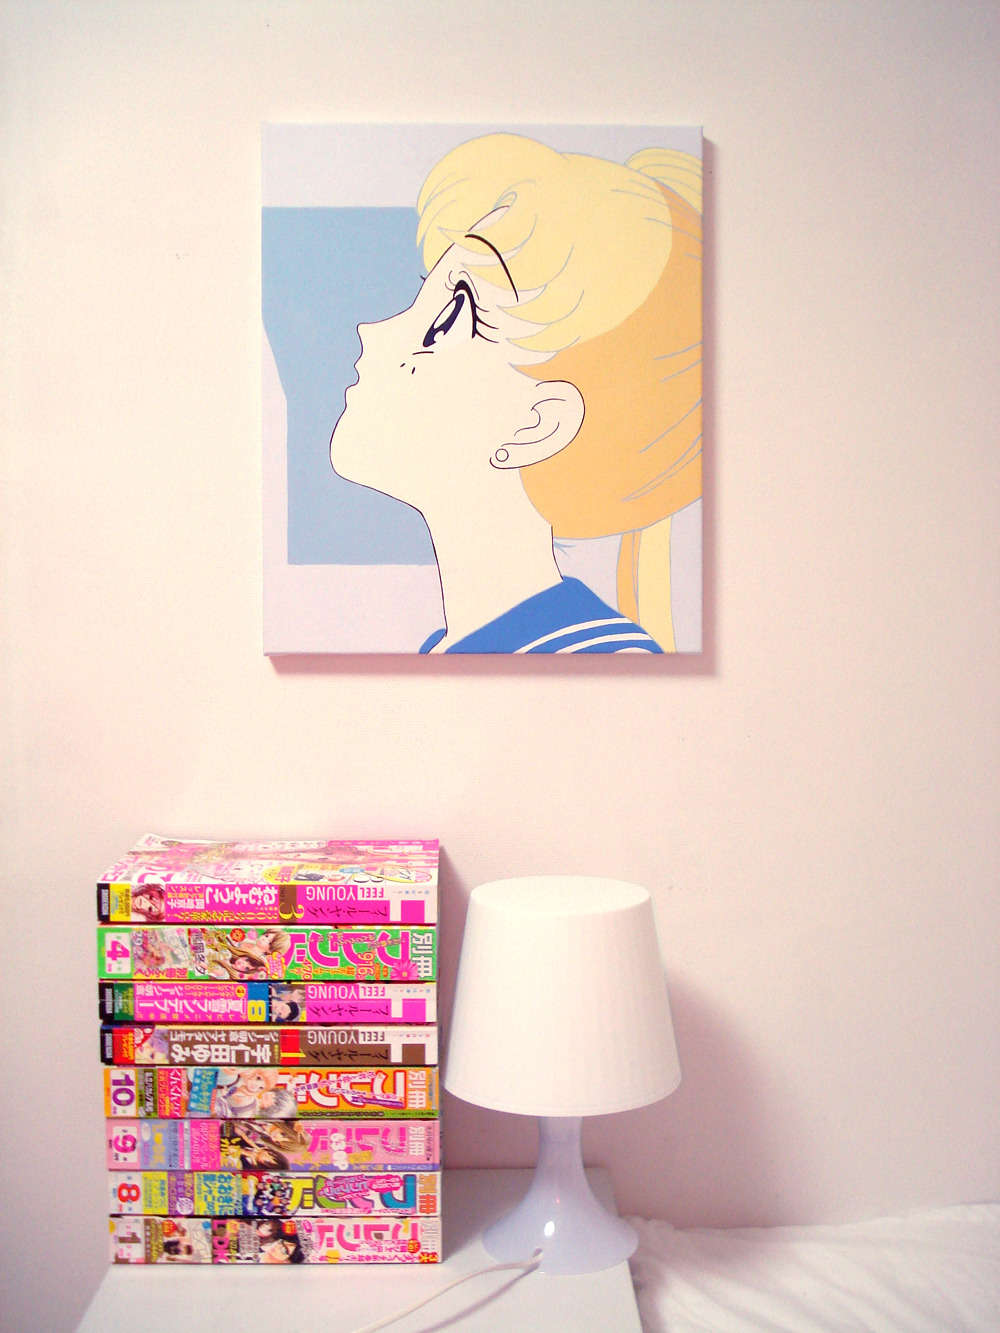 rnortal: dearninety: part of my room (2) my painting sailor moon, acrylic on canvas, 45.5 x 39.7cm youre so talented bless 